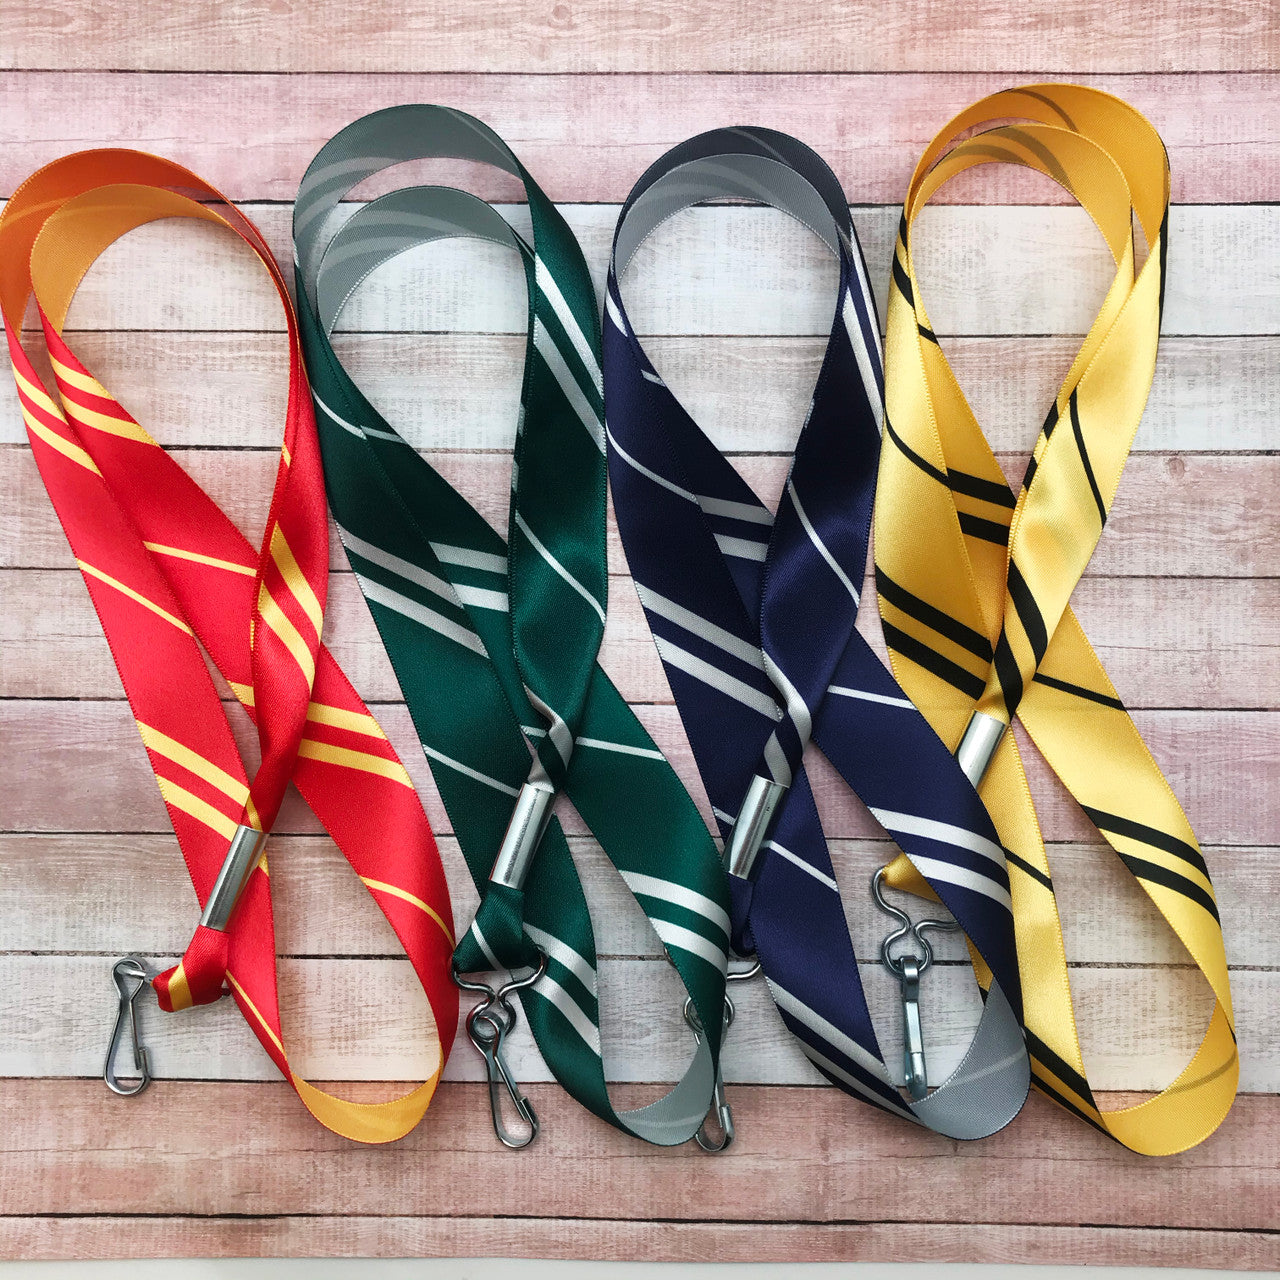 Wizard Lanyards value pack of 4 for printed on 7/8" satin ribbon